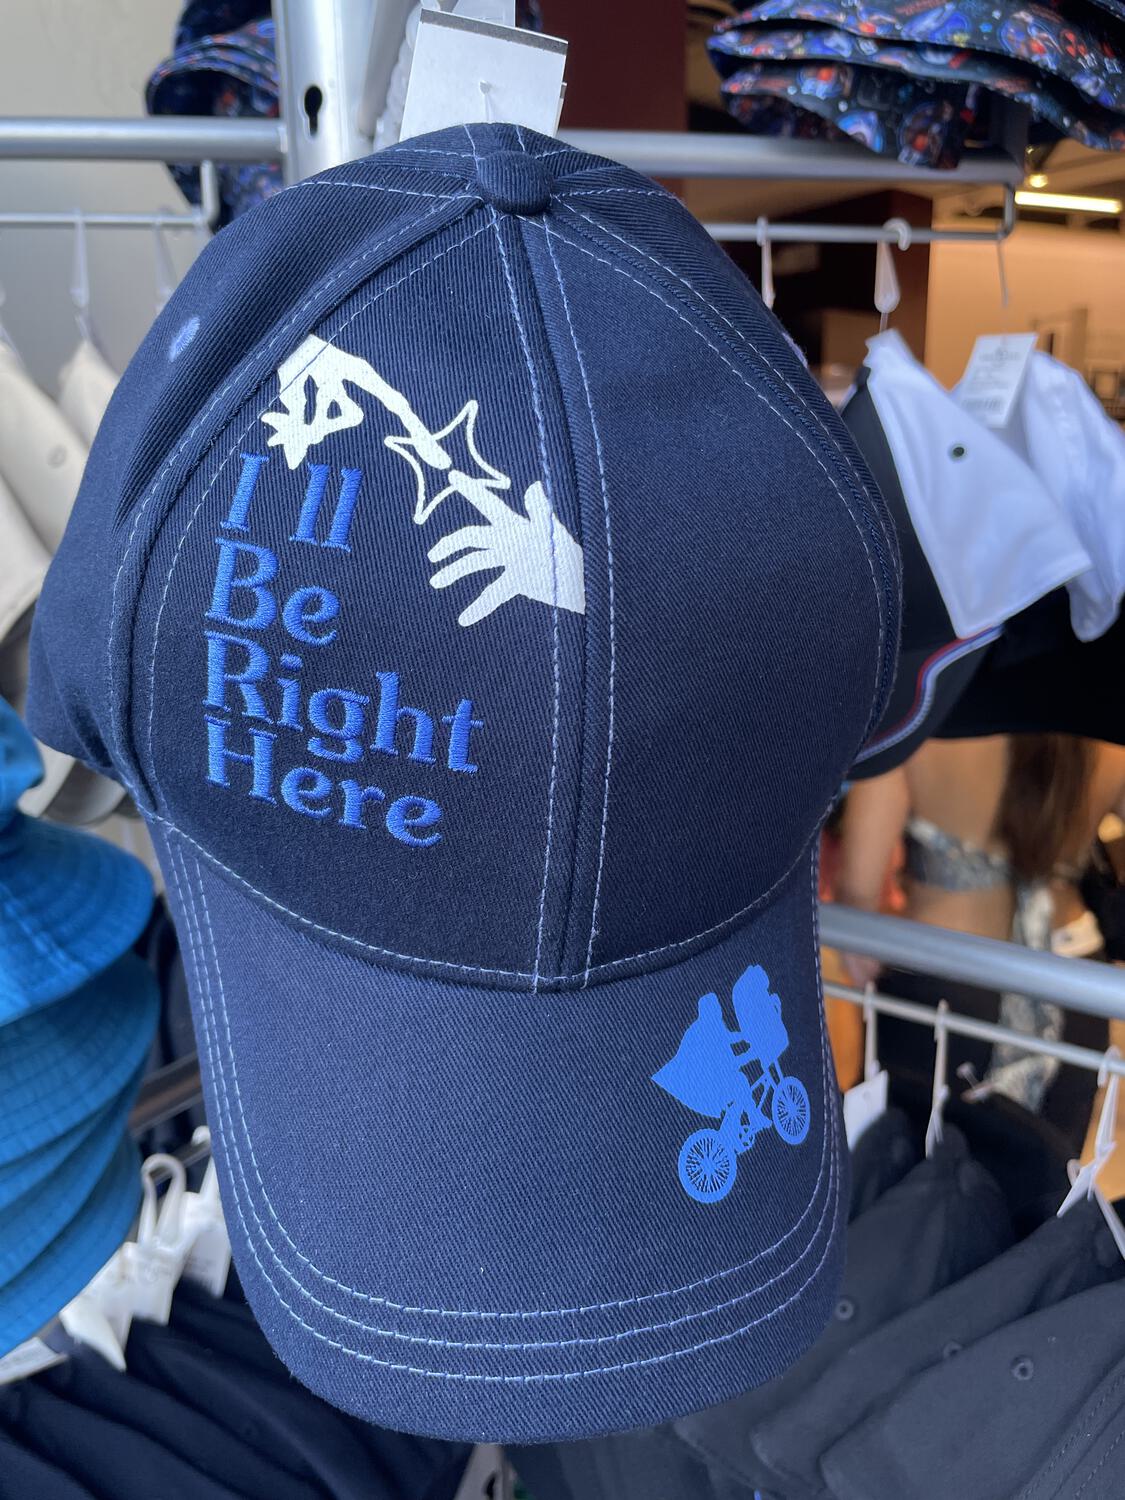 A baseball cap that reads "I'll Be Right Here," with imagery depicting E.T. and Elliott